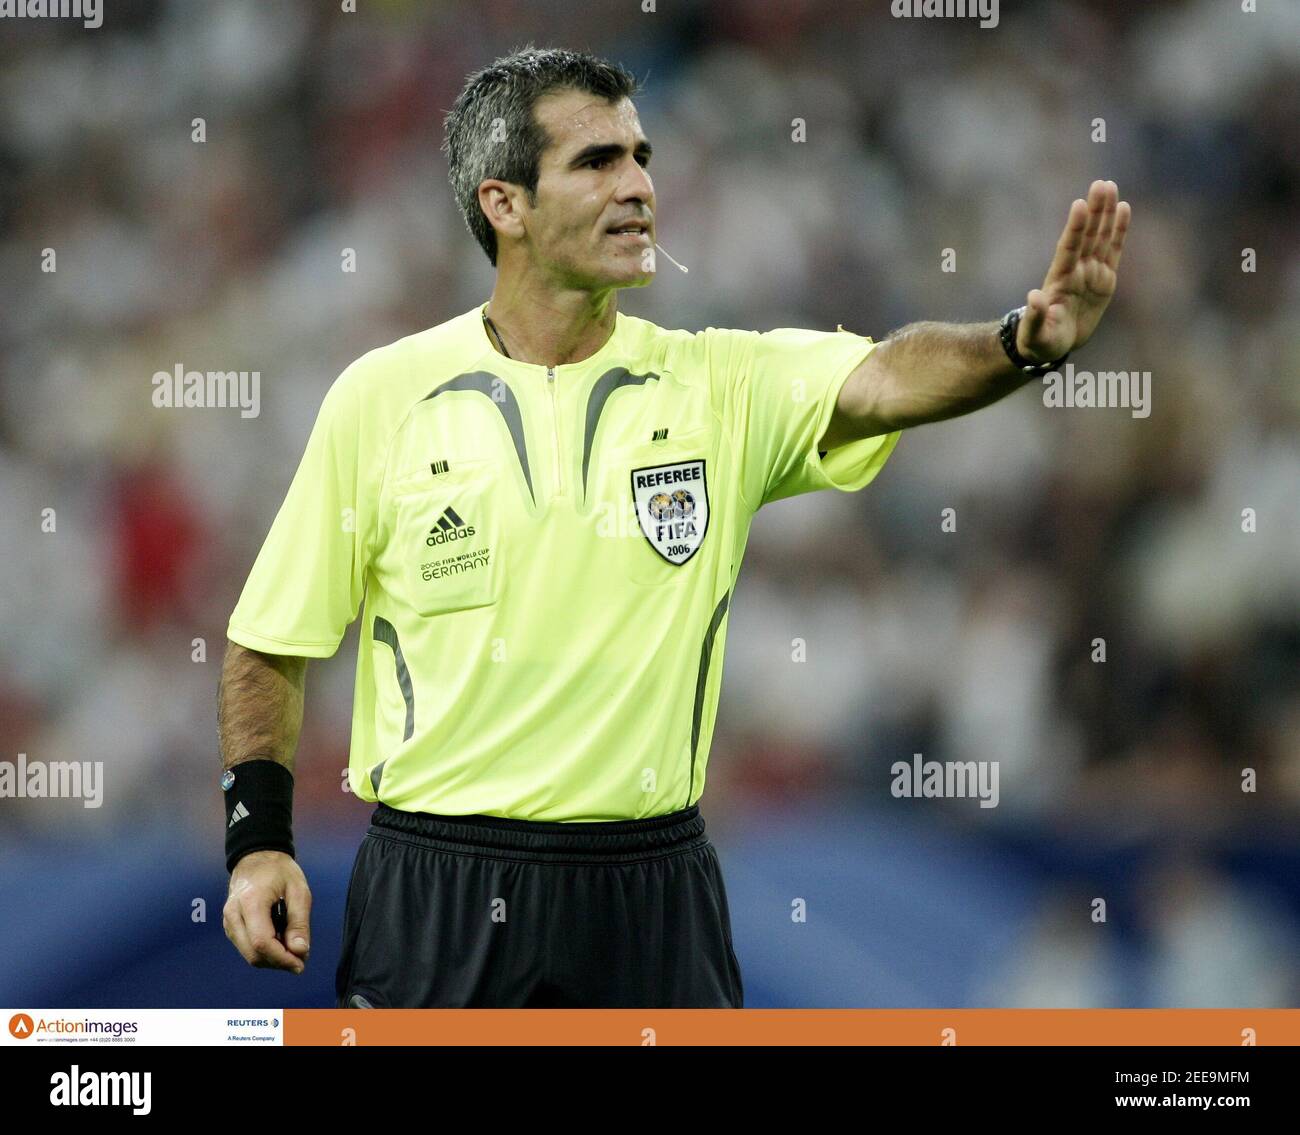 Football - England v Portugal 2006 FIFA World Cup Germany - Quarter Final -  FIFA World Cup Stadium, Gelsenkirchen - 1/7/06 Referee Horacio Elizondo  Mandatory Credit: Action Images / Andrew Couldridge Livepic Stock Photo -  Alamy